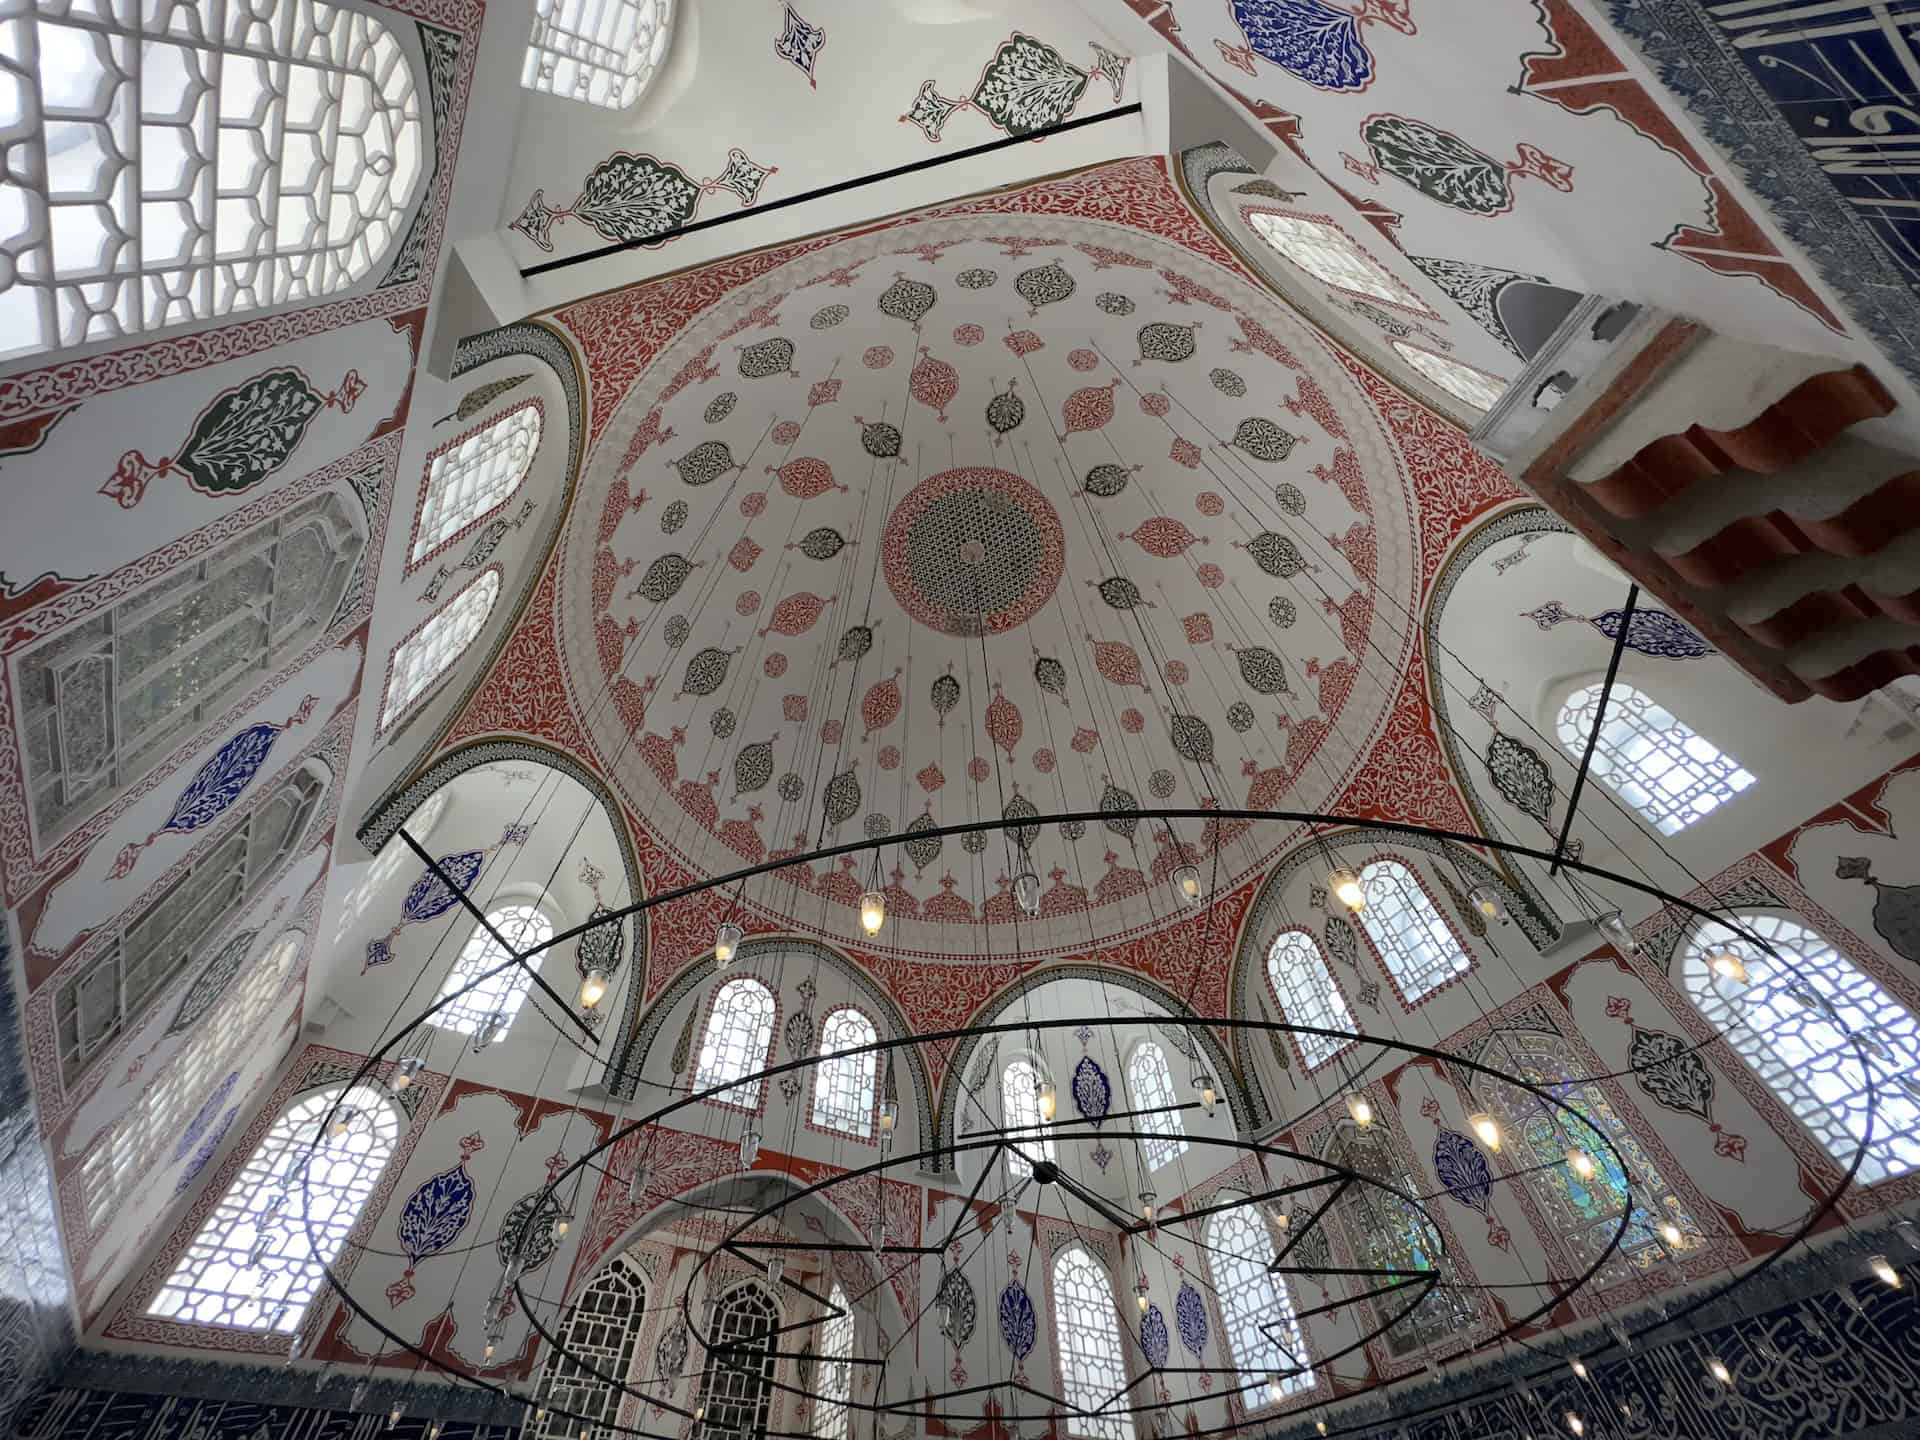 Dome of the Tomb of Turhan Hatice Sultan